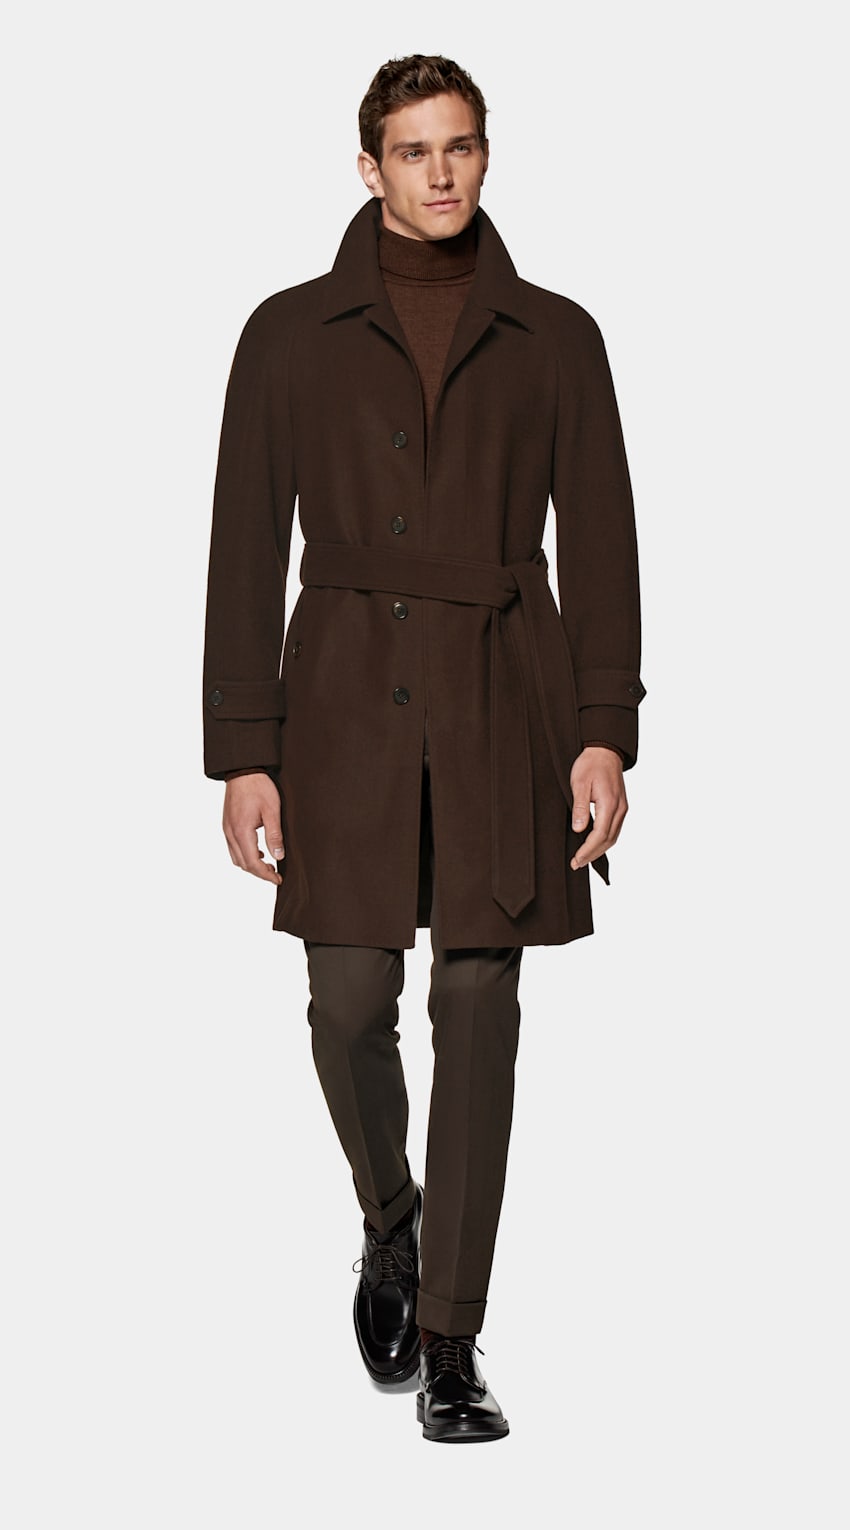 SUITSUPPLY Pure S180's Wool by Drago, Italy Dark Brown Belted Overcoat